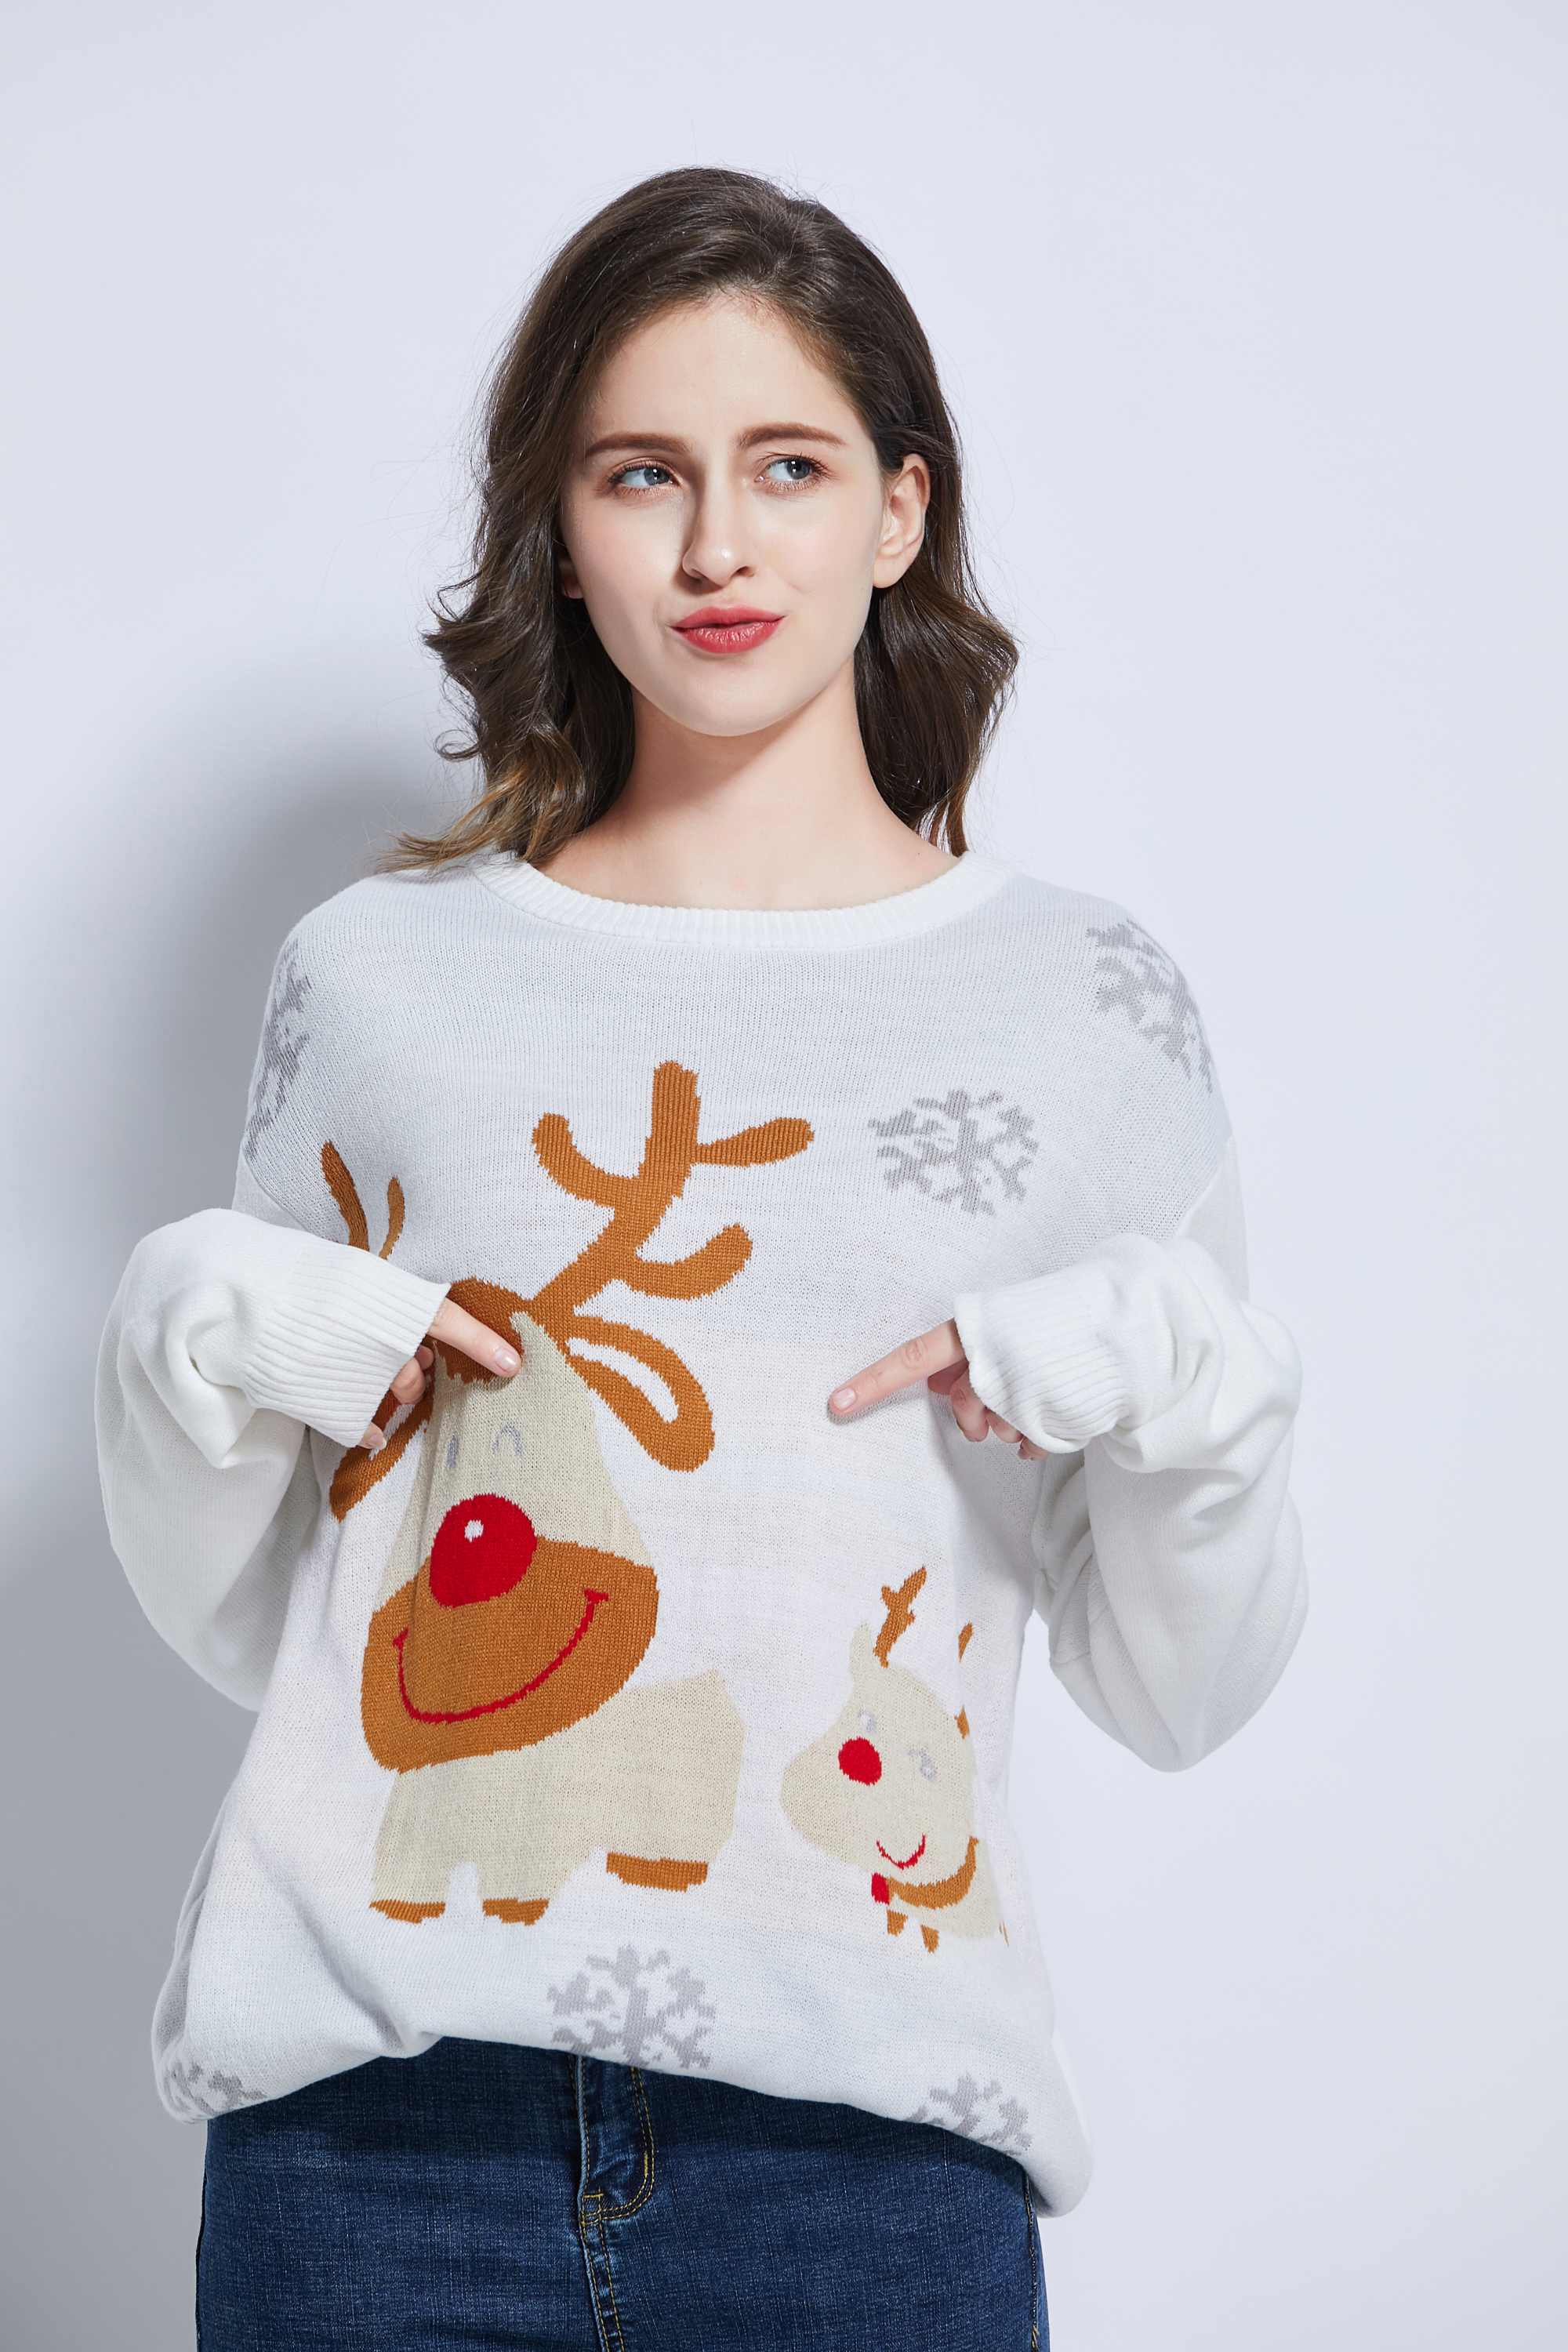 Team club player promotion jacquard unisex knitting Christmas design rudolph reindeer ugly Christmas sweater Xmas sweater